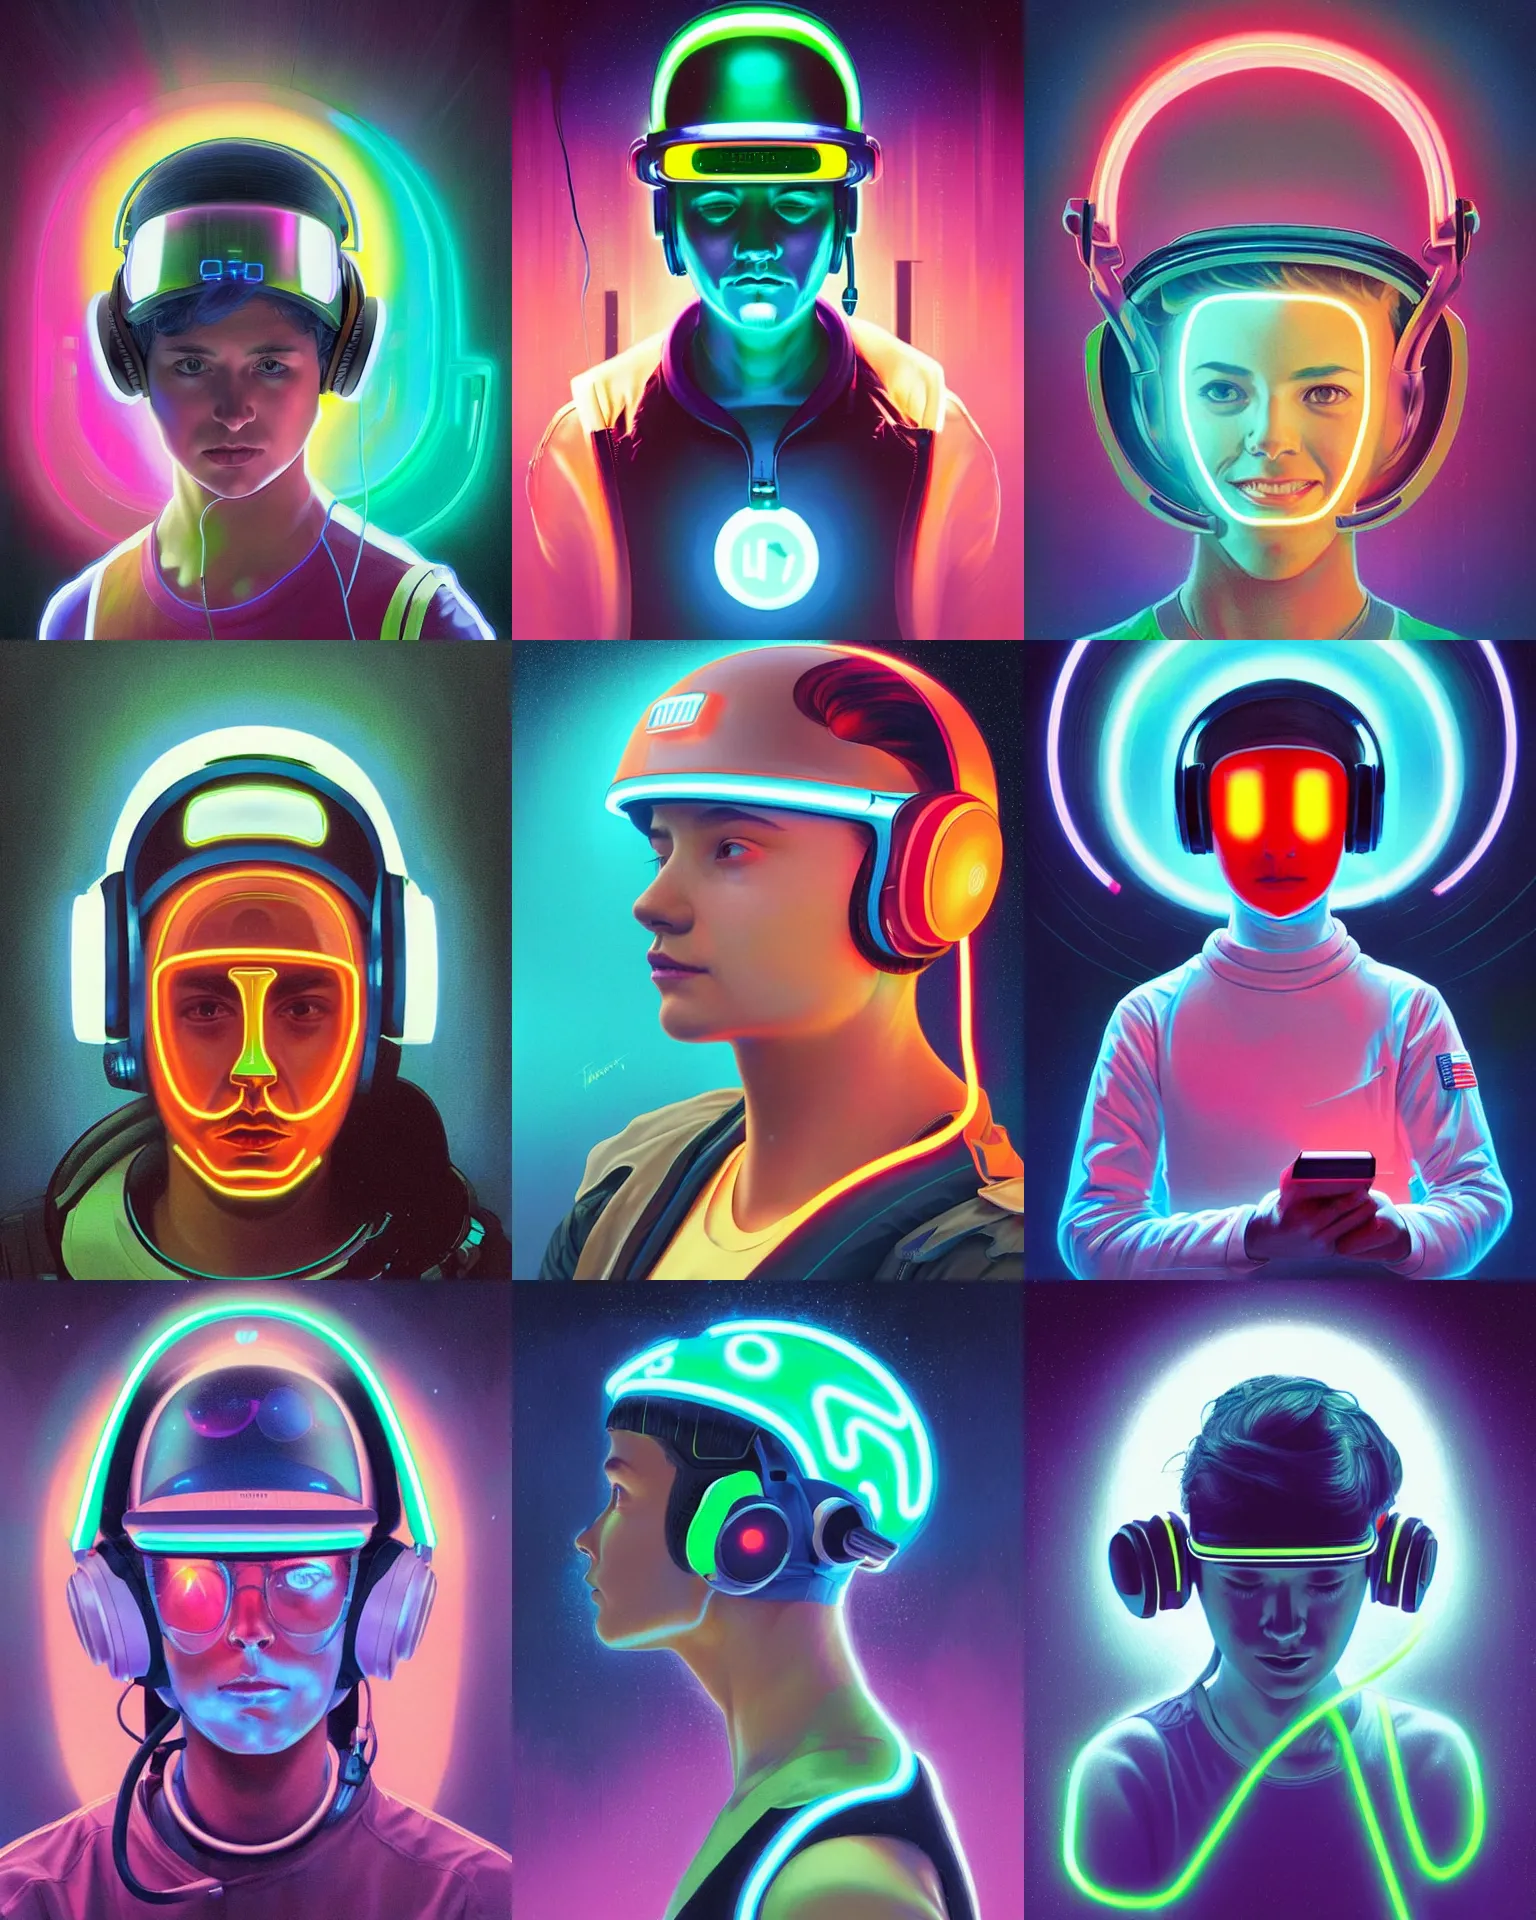 Prompt: a future coder looking on, glowing visor over eyes and sleek neon headphones, neon accents, bottom lighting, desaturated headshot portrait painting by rhads, tom whalen, alex grey, alphonse mucha, donoto giancola, astronaut cyberpunk electric fashion photography